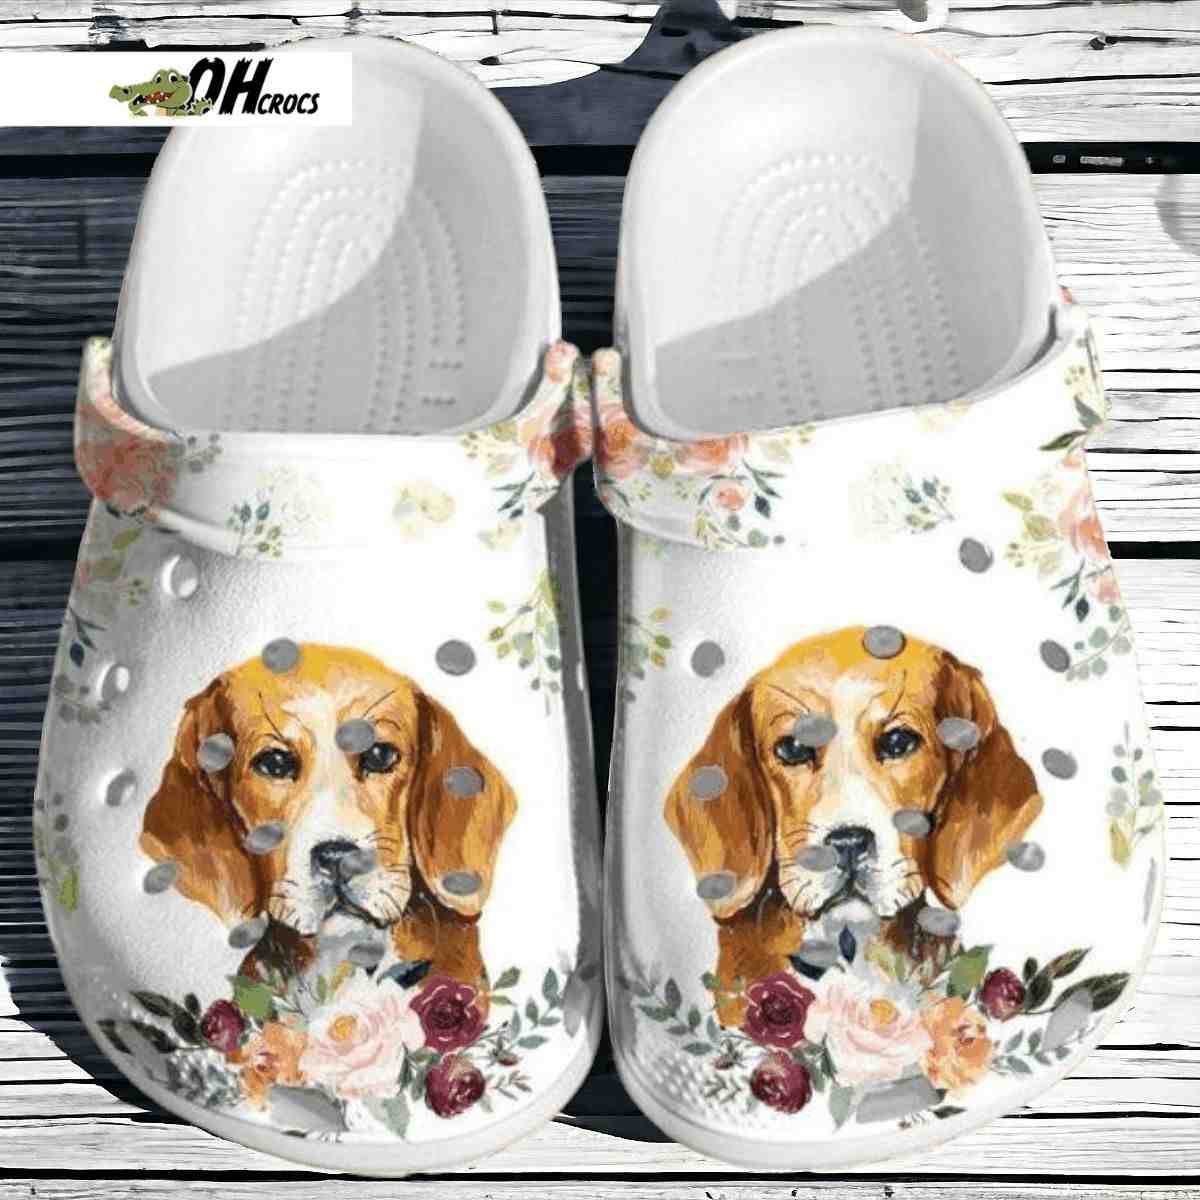 Cool Beagle Dog Art With Bloom Flowers For Beagle Lovers Crocs Clog Shoes Gift